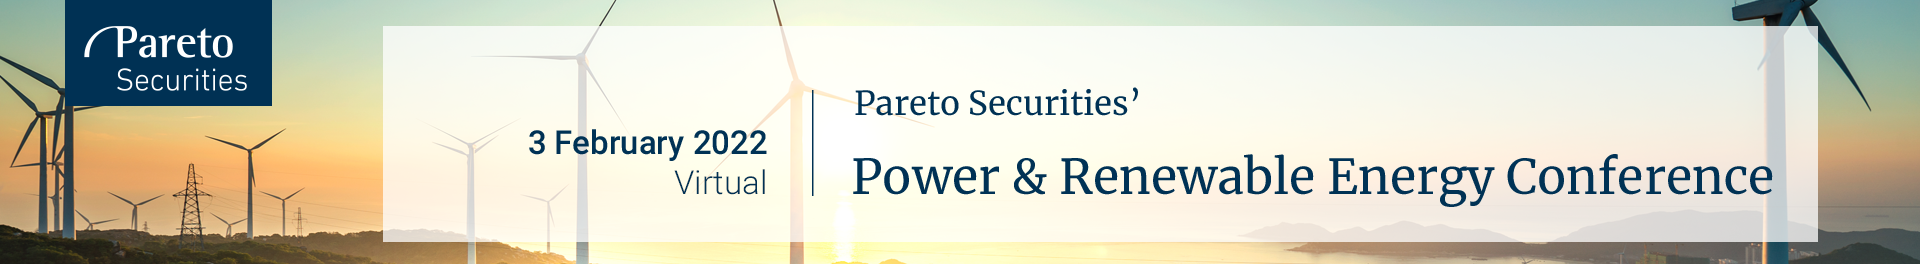 Header image for Pareto Securities' 24th annual Power & Renewable Energy Conference